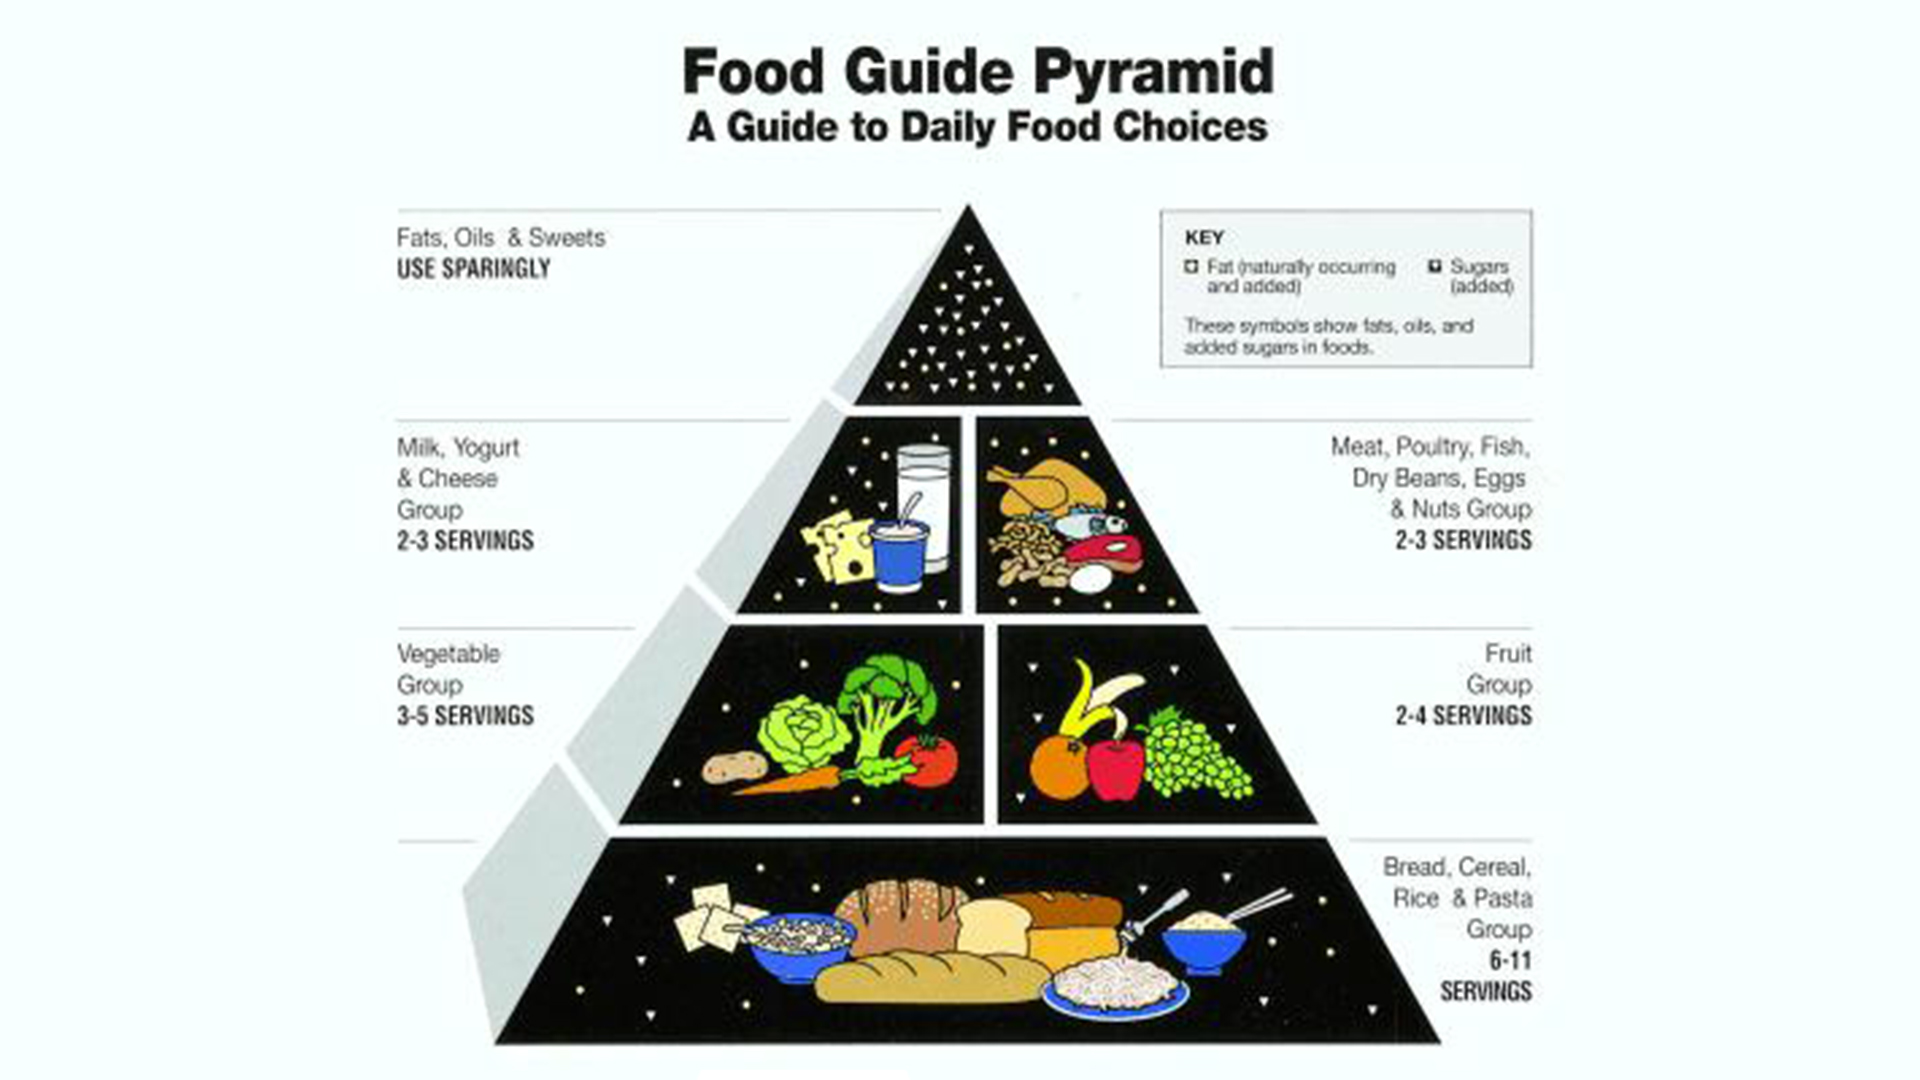  USDA Human Nutrition Information Service created Food Guide Pyramid (1991) 